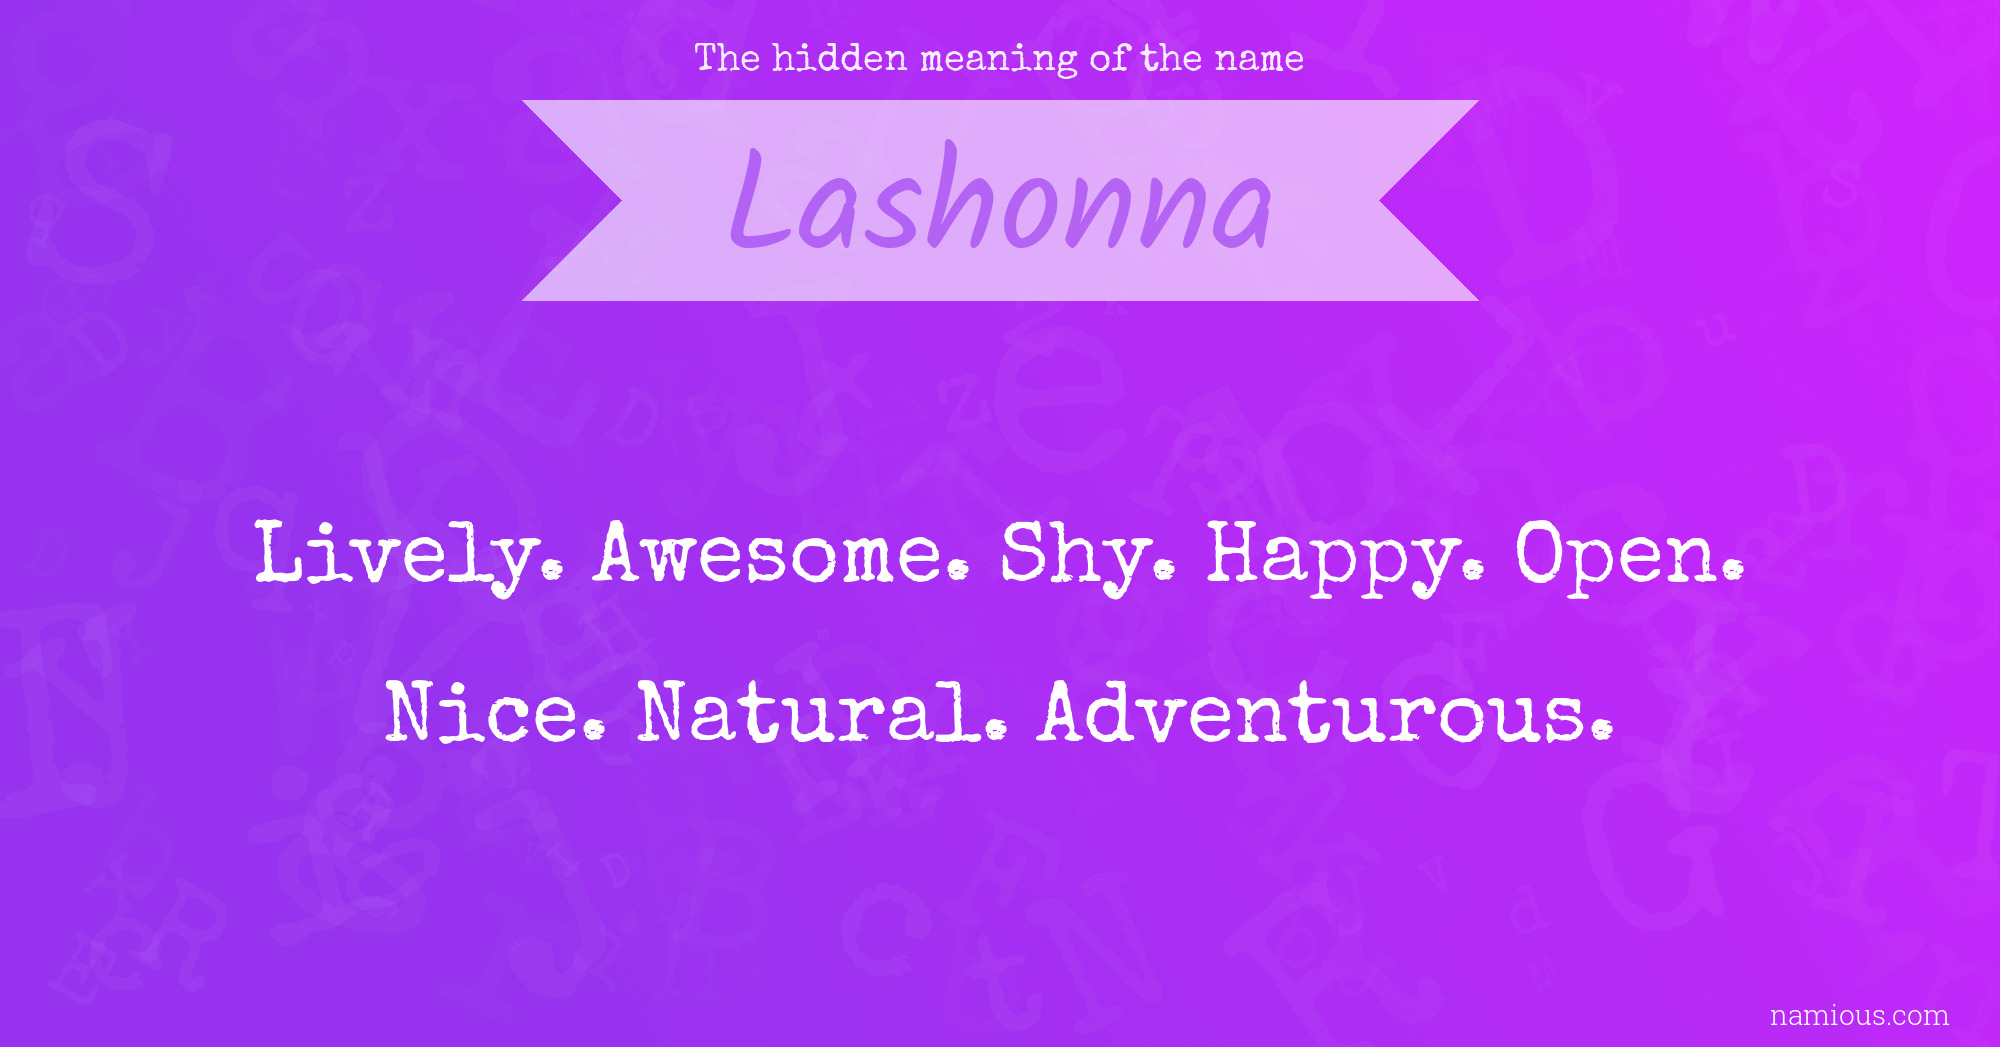 The hidden meaning of the name Lashonna